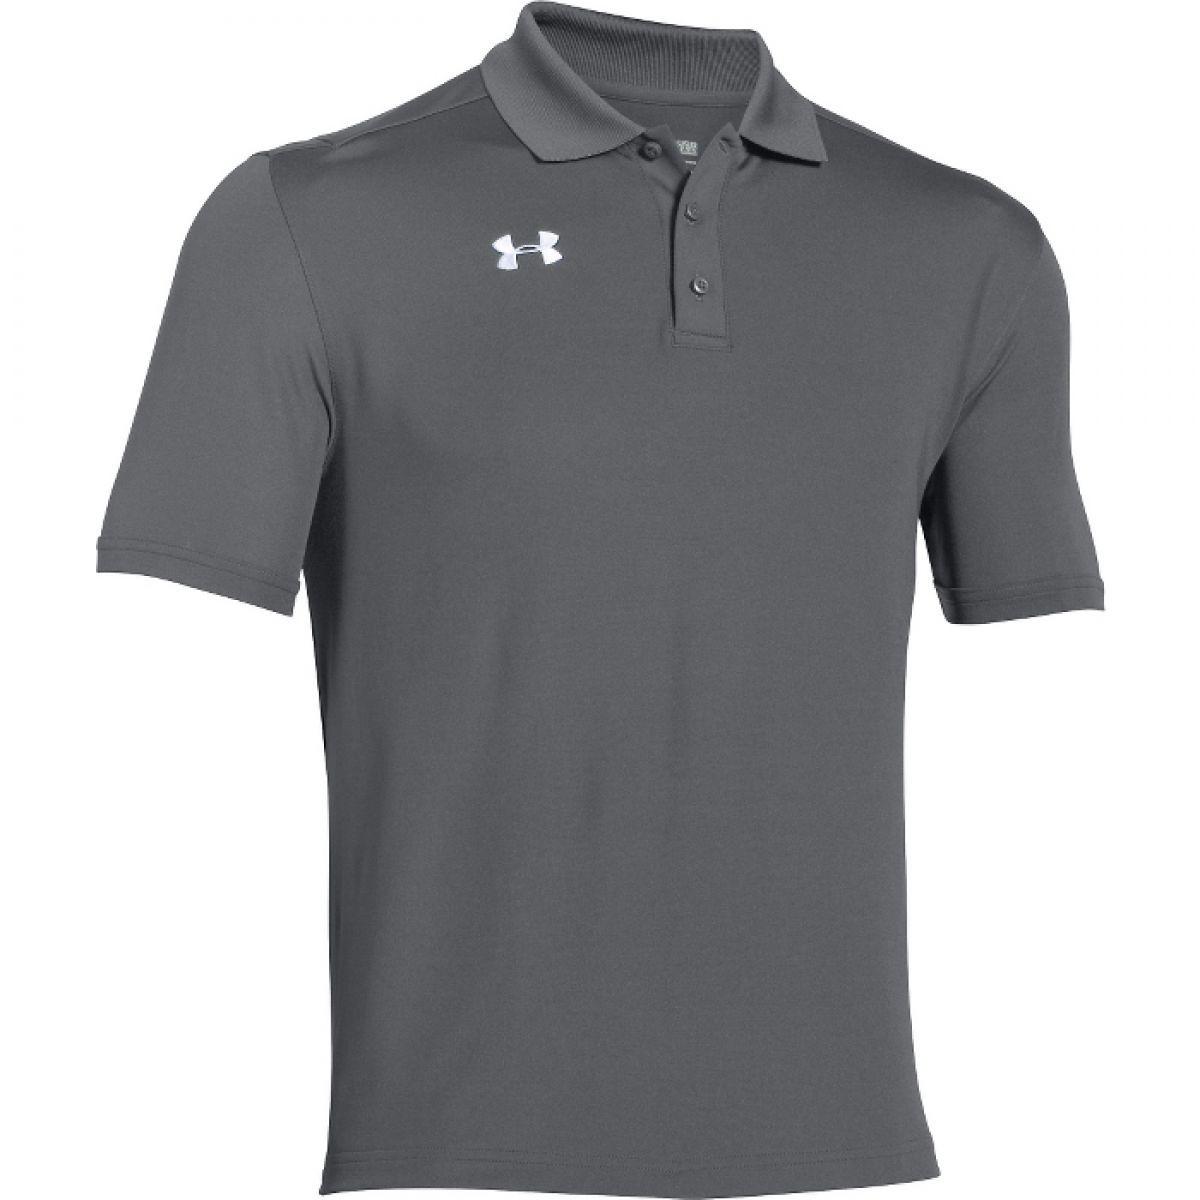 Under Armour Men's Team Armour Polo - image 1 of 2